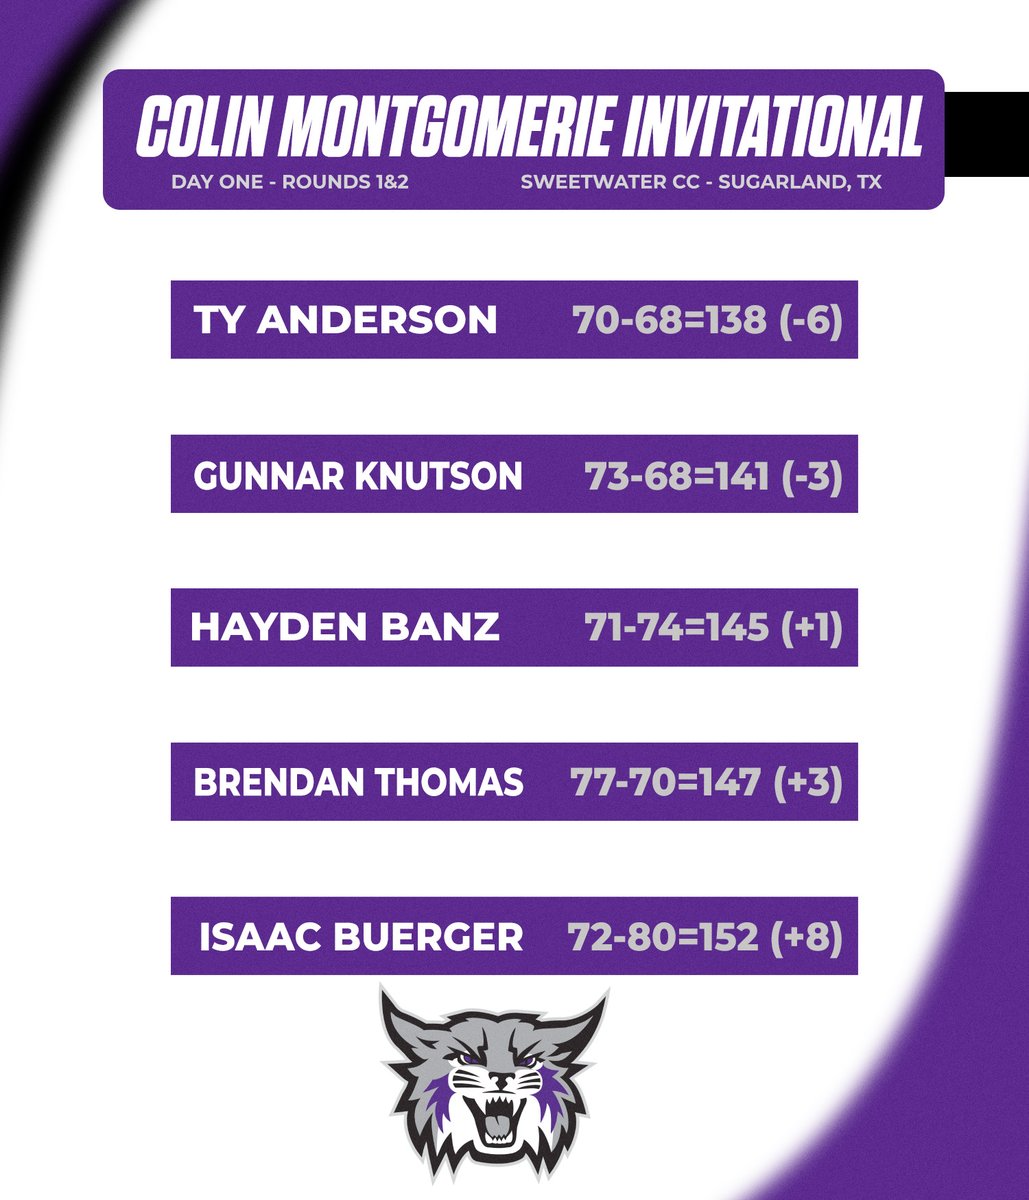 Strong start for the Wildcats at the Colin Montgomerie Invitational today at Sweetwater Country Club with a 10-under par total of 566. Ty Anderson (-6) and Gunnar Knutson (-3) led the way for WSU. Final round starts at 8:15 am CT on Tuesday. Live scoring: bit.ly/3IkNo1U